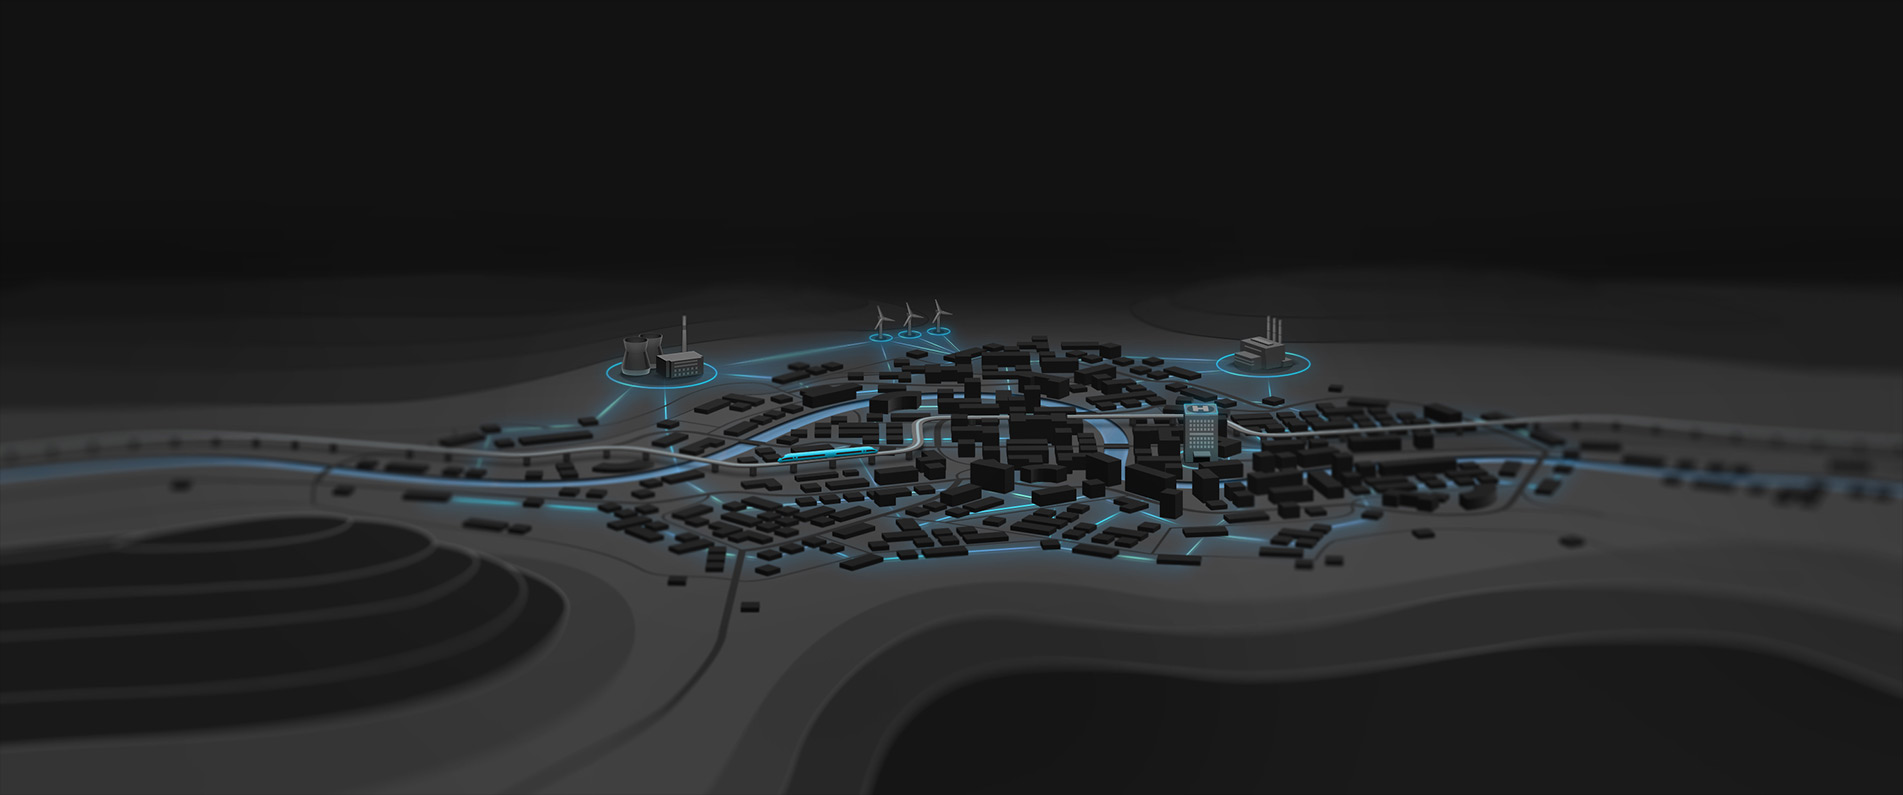 Visualization of city of future, using HTS technologies for transporting power.